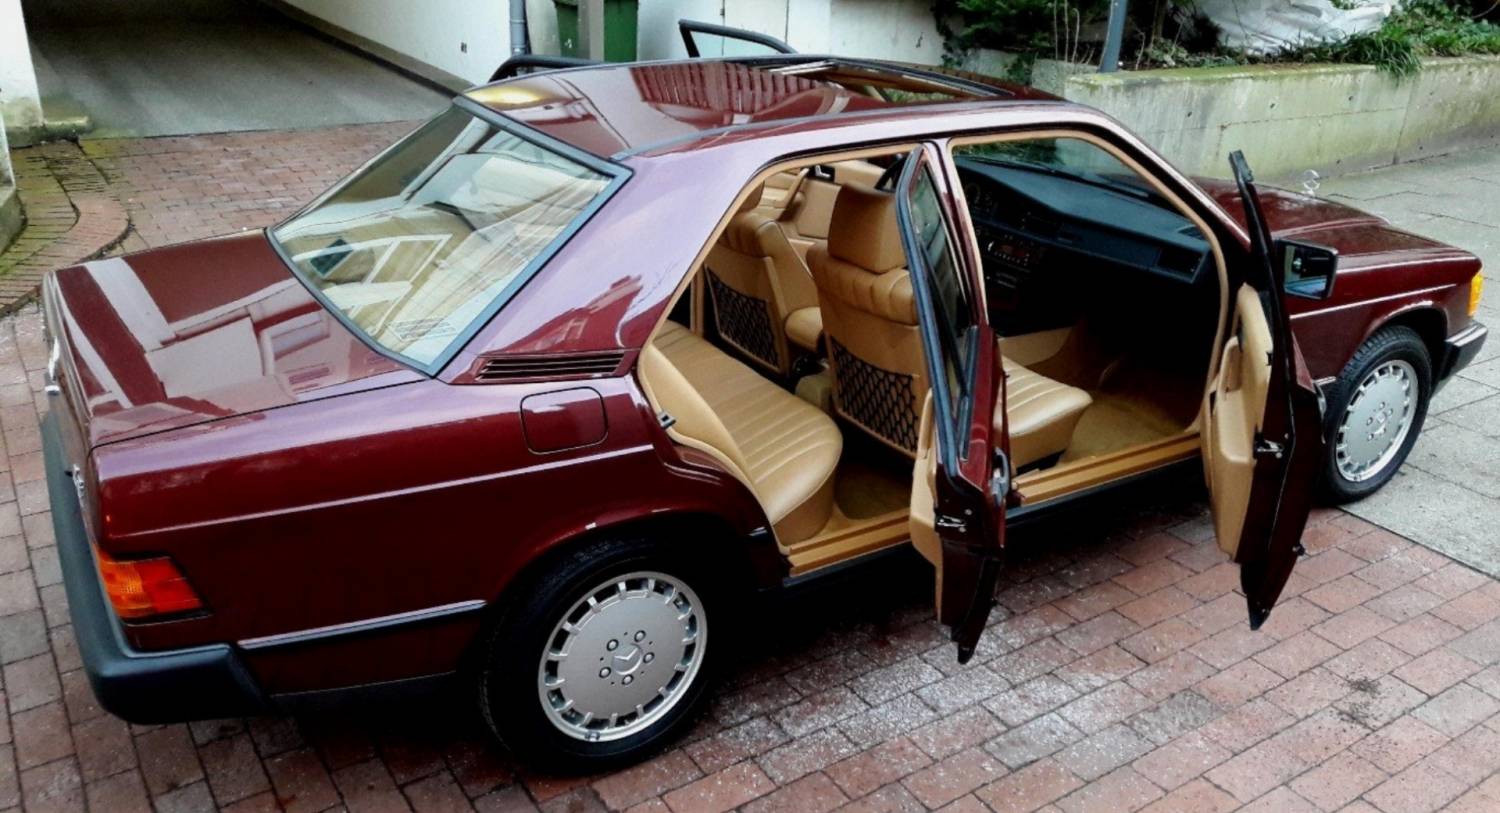 1986 Mercedes-Benz 190E Is A Brand New Old Car That Costs $55,500